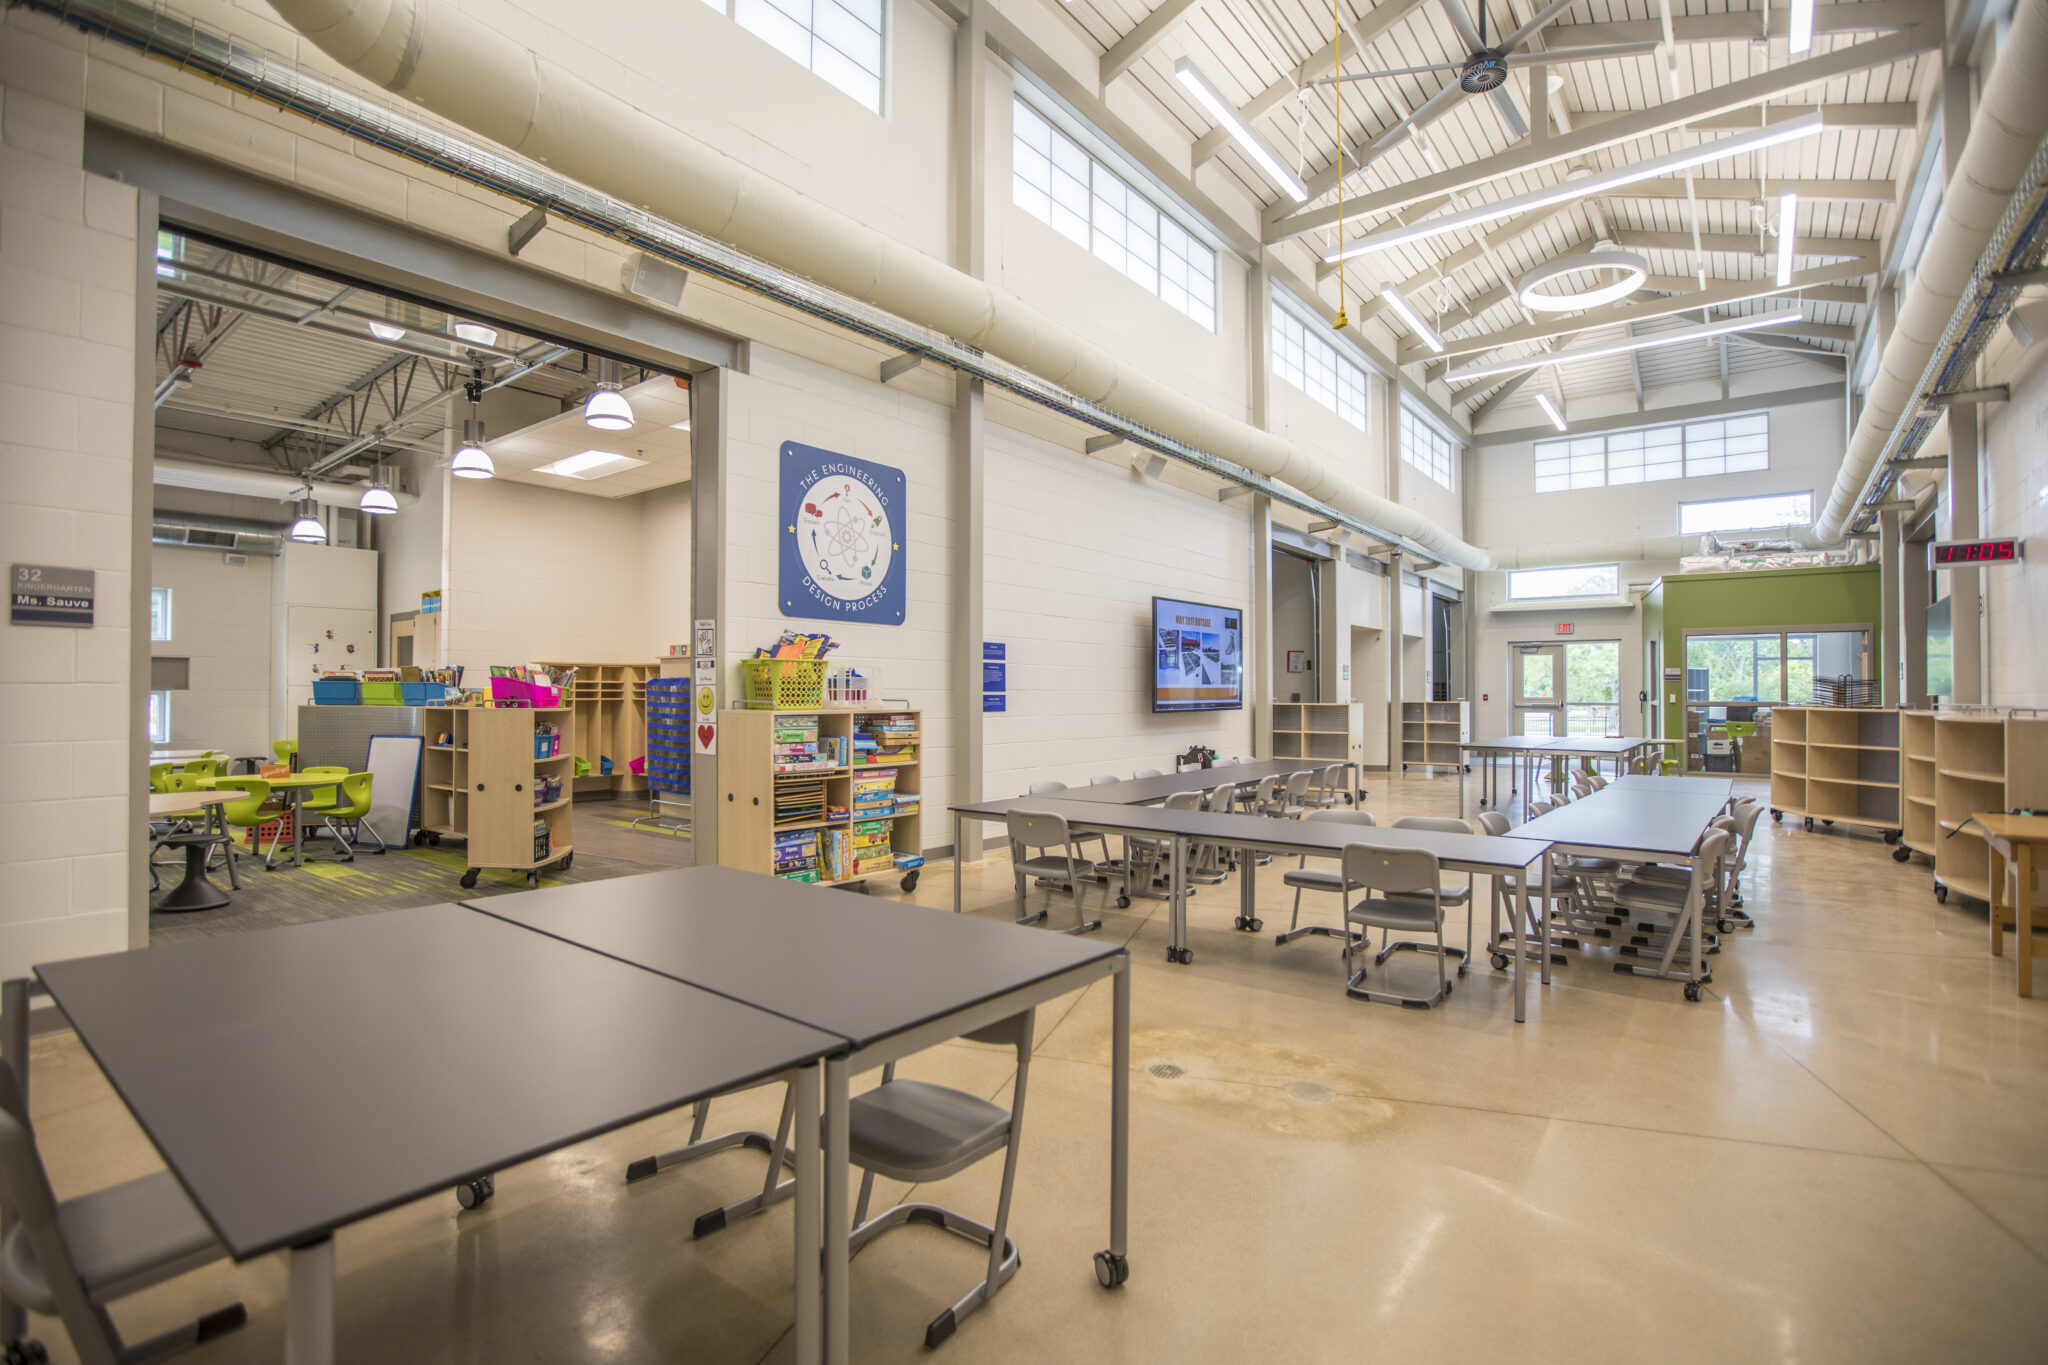 Elementary School Classroom with an open concept and innovative furniture